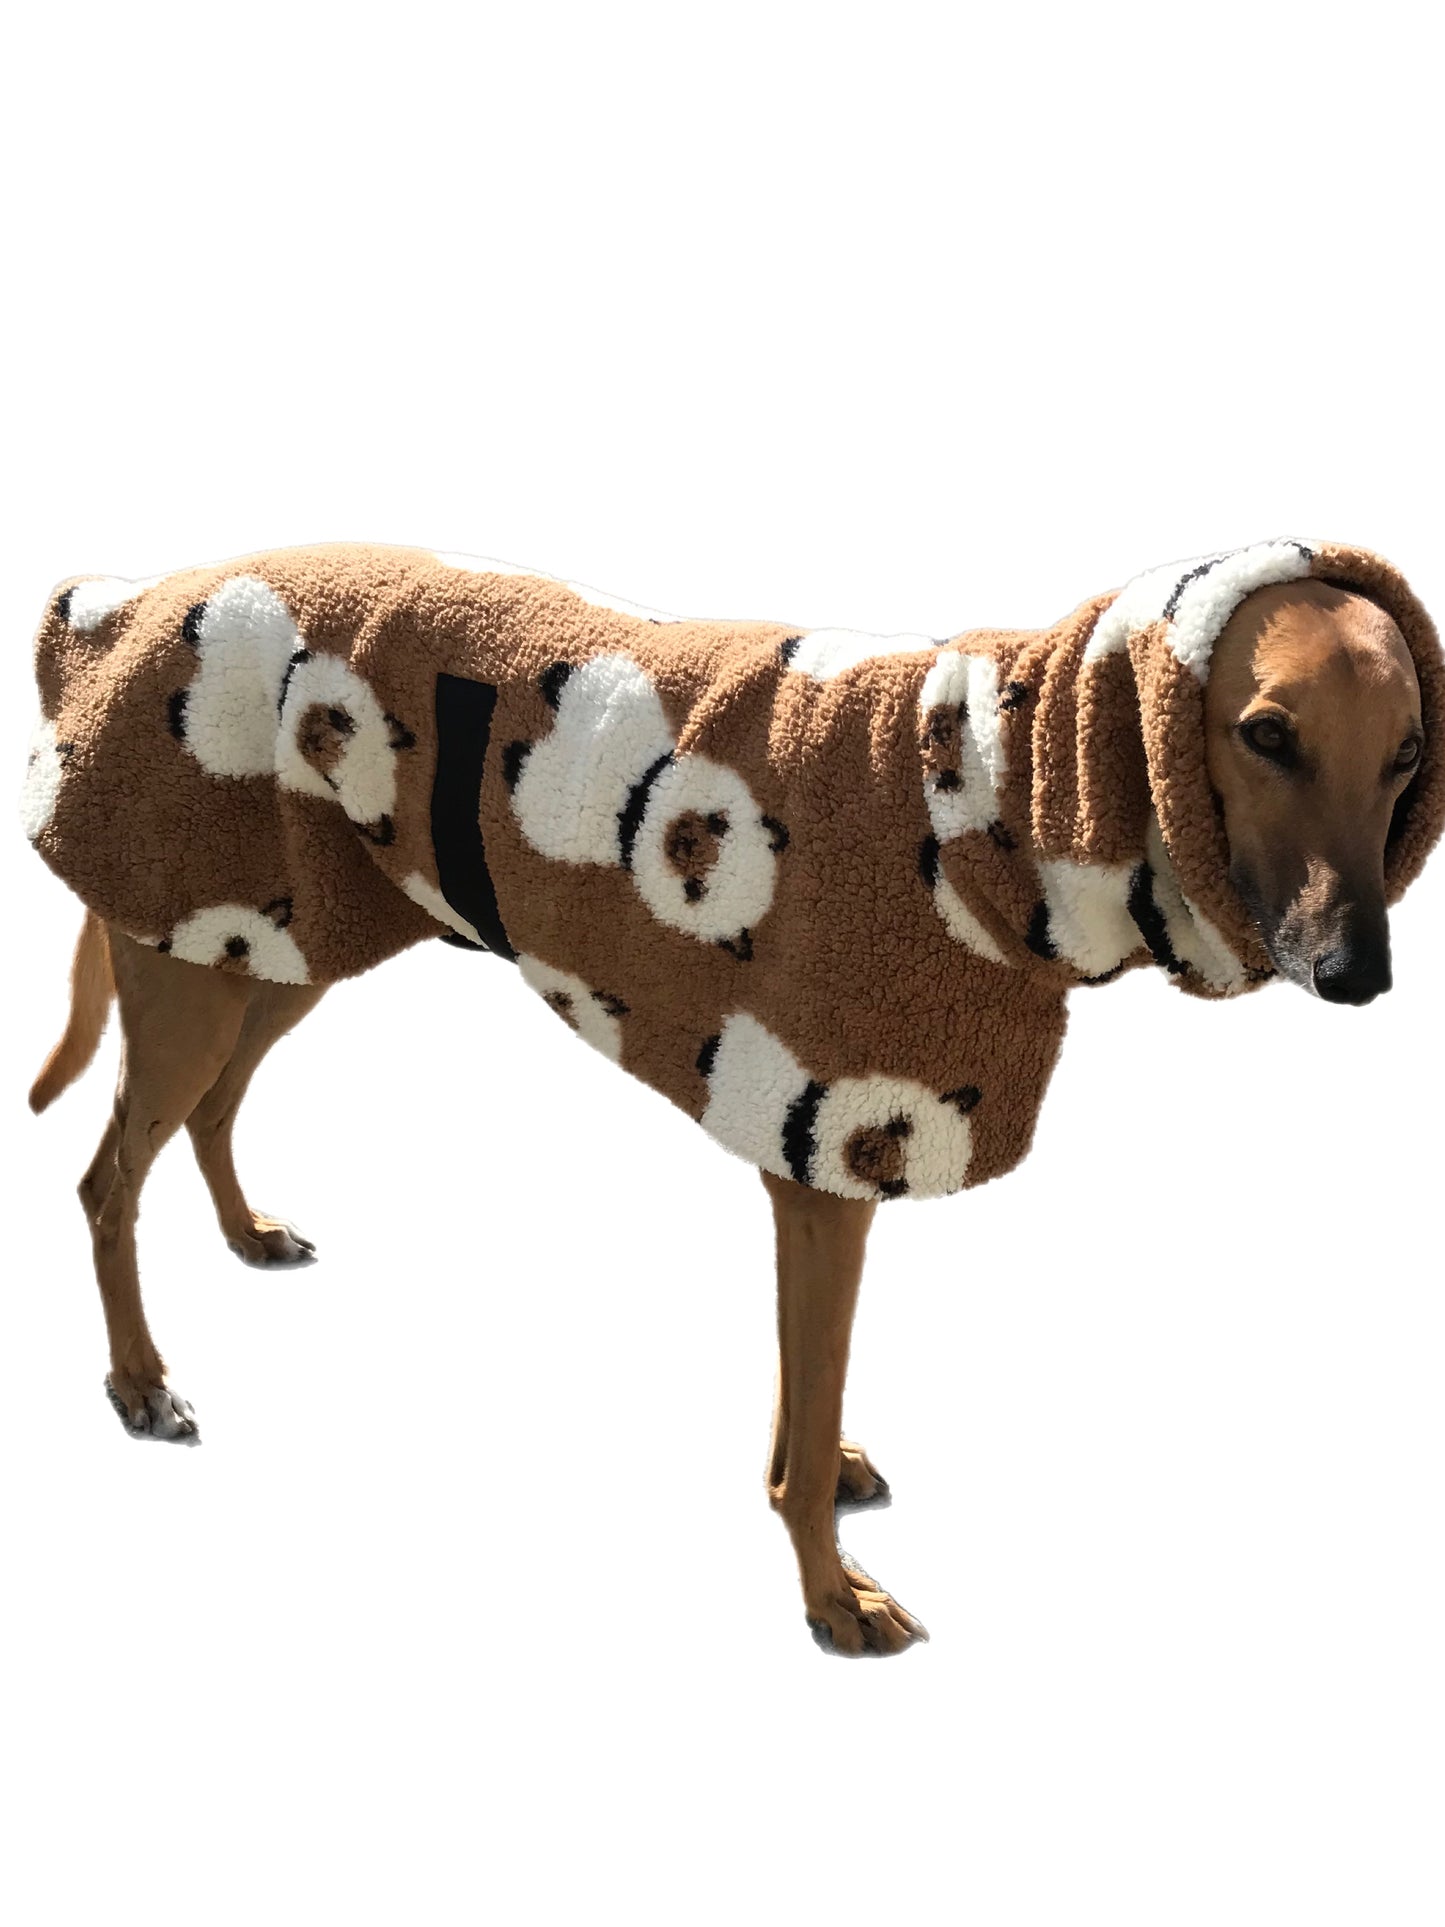 Extra thick Sherpa deluxe style greyhound coat with snuggly wide neck roll